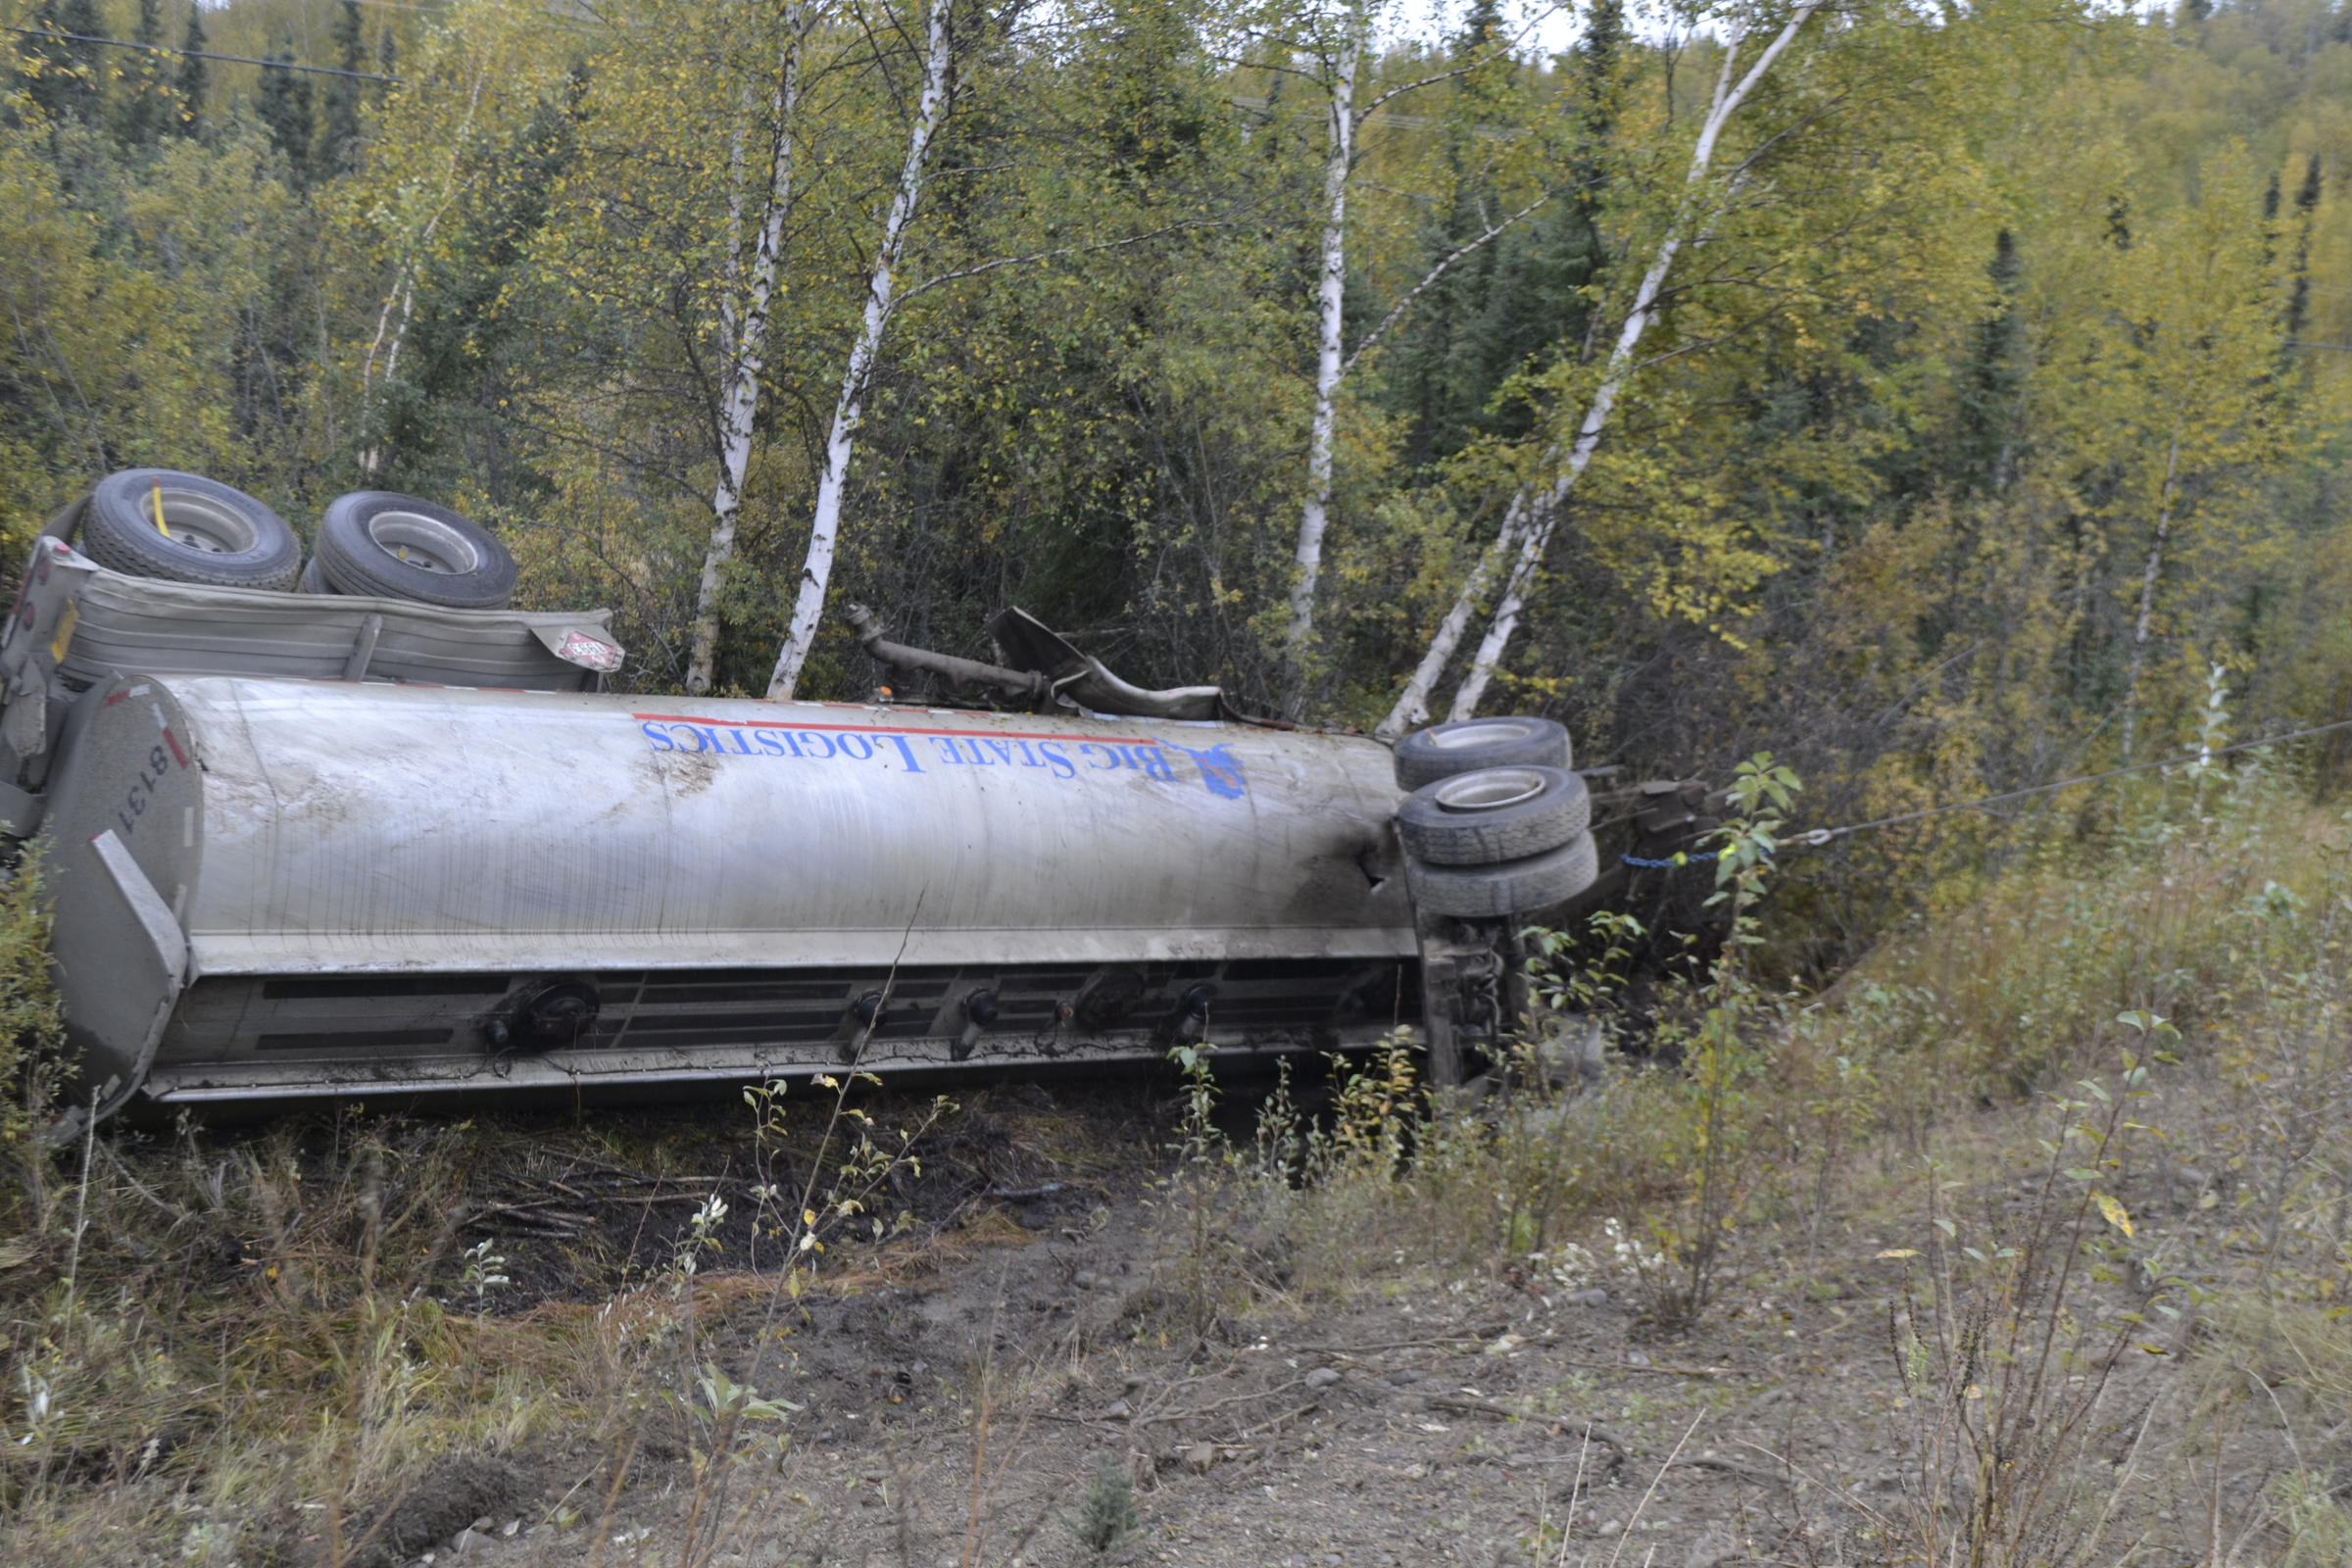 Investigators say multiple punctures enabled most of the 5,000 gallons of diesel fuel in this tanker to quickly leak out after it overturned Monday near the intersection of Lost Lake Road and the Richardson Highway. (Photo courtesy of Alaska Department of Environmental Conservation)